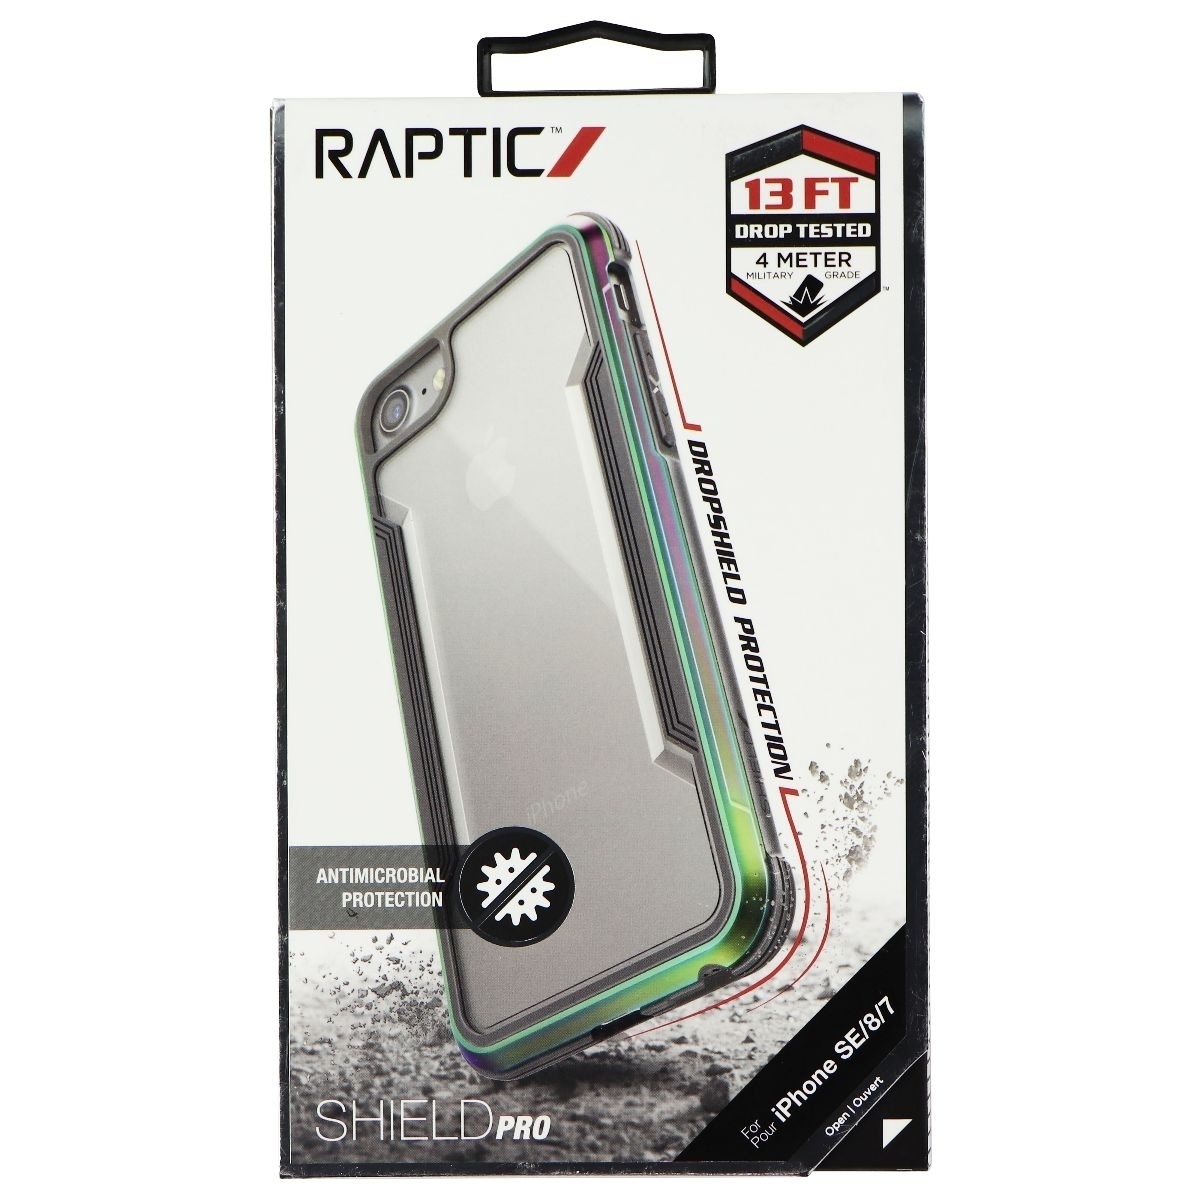 Raptic SHIELD Pro Series Case For Apple IPhone SE (2nd Gen) / 8 / 7 - Iridescent